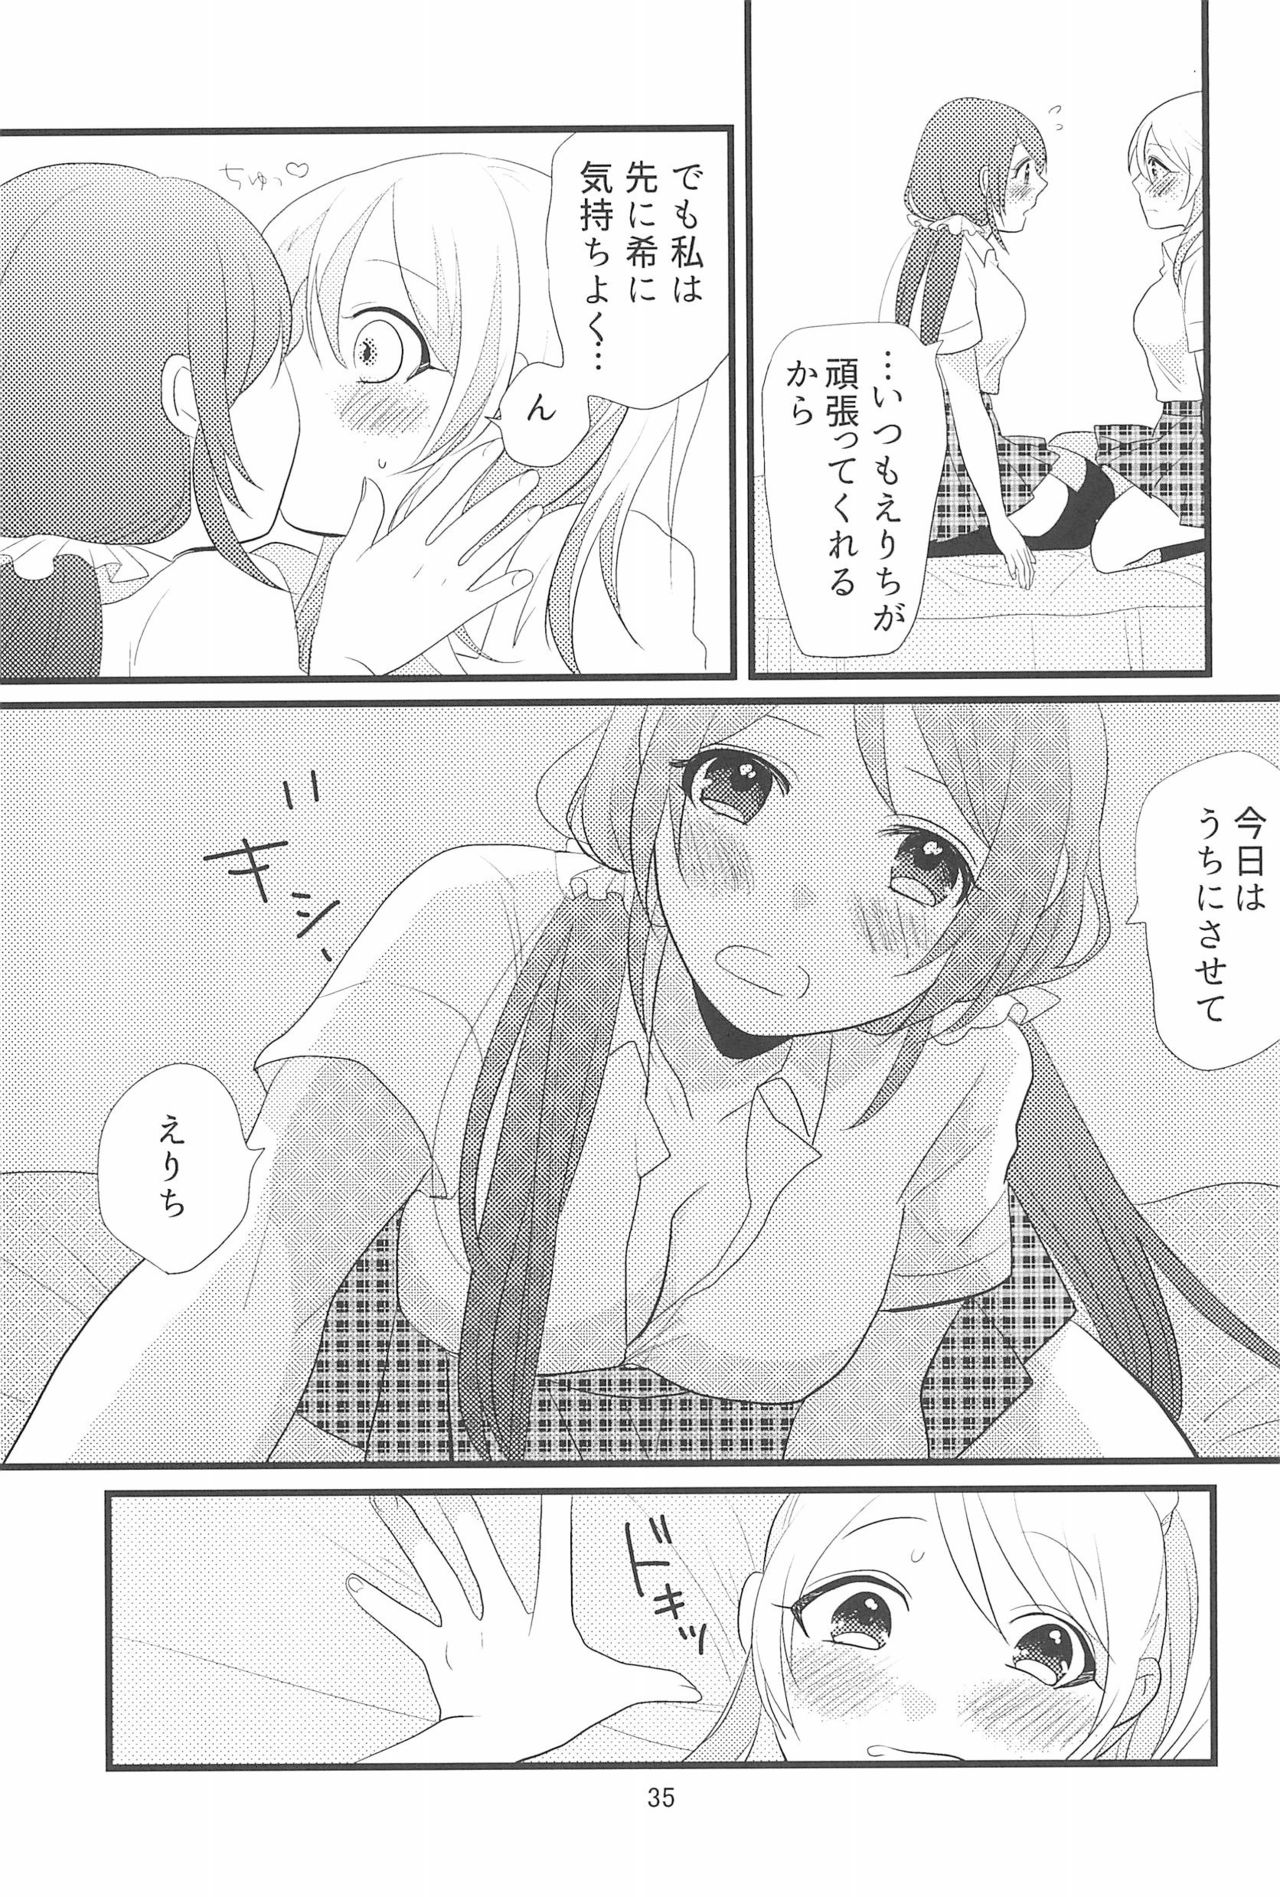 (C90) [BK*N2 (Mikawa Miso)] HAPPY GO LUCKY DAYS (Love Live!) page 39 full